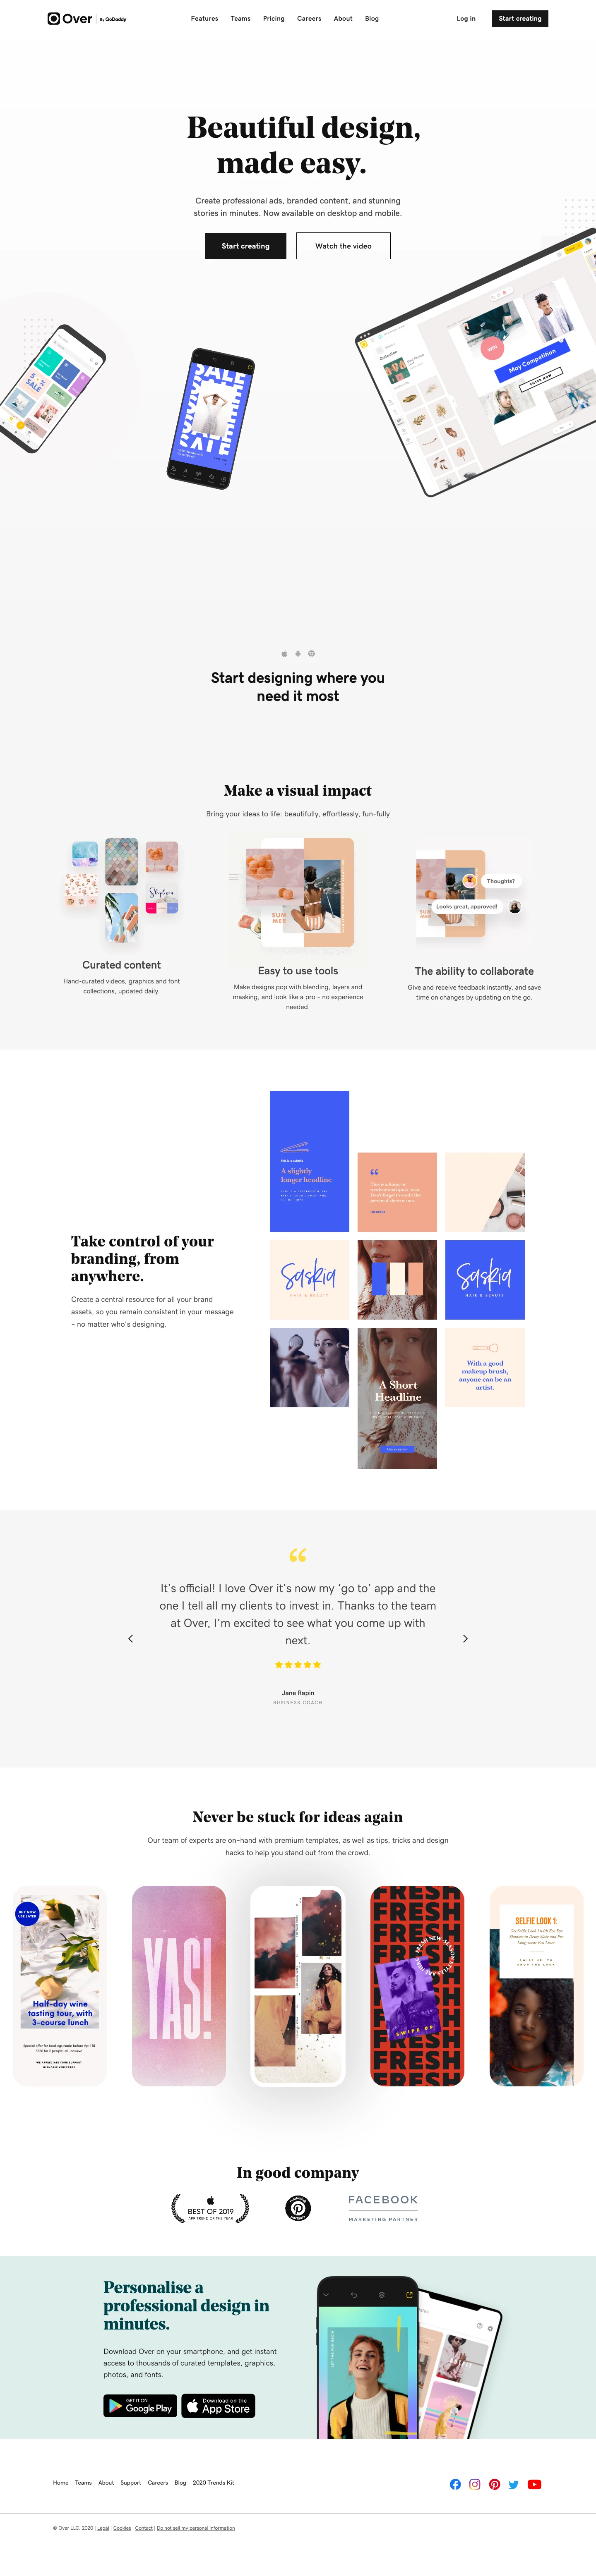 Over Landing Page Example: Beautiful design, made easy. Create professional ads, branded content, and stunning stories in minutes. Now available on desktop and mobile.